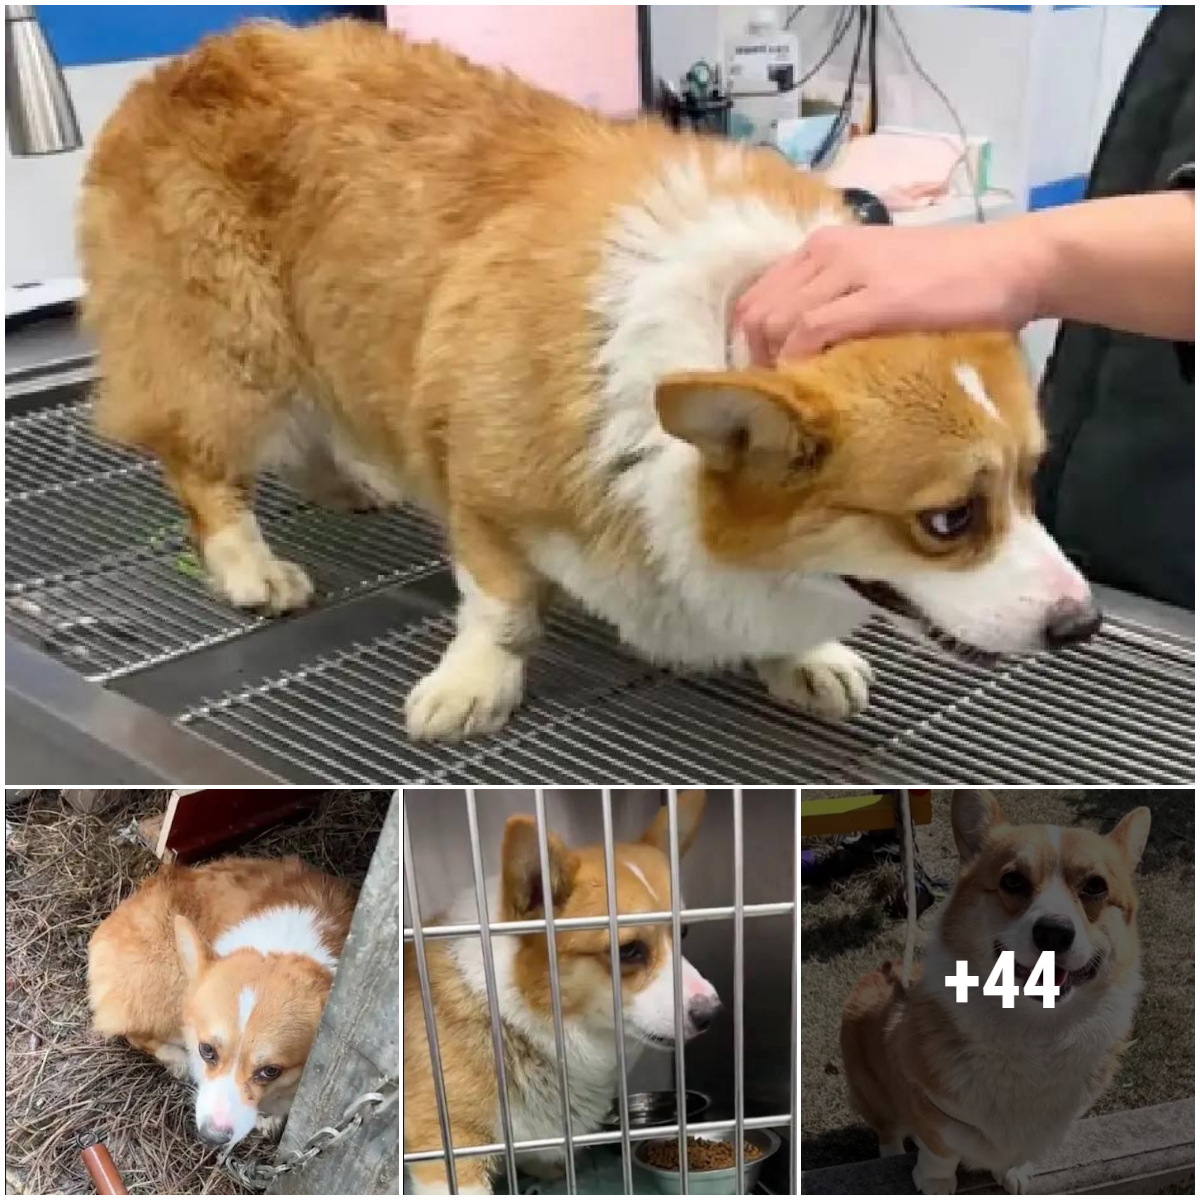 The young girl decided to give new life to her Corgi when she found him tied up on the stairs in a cold rain